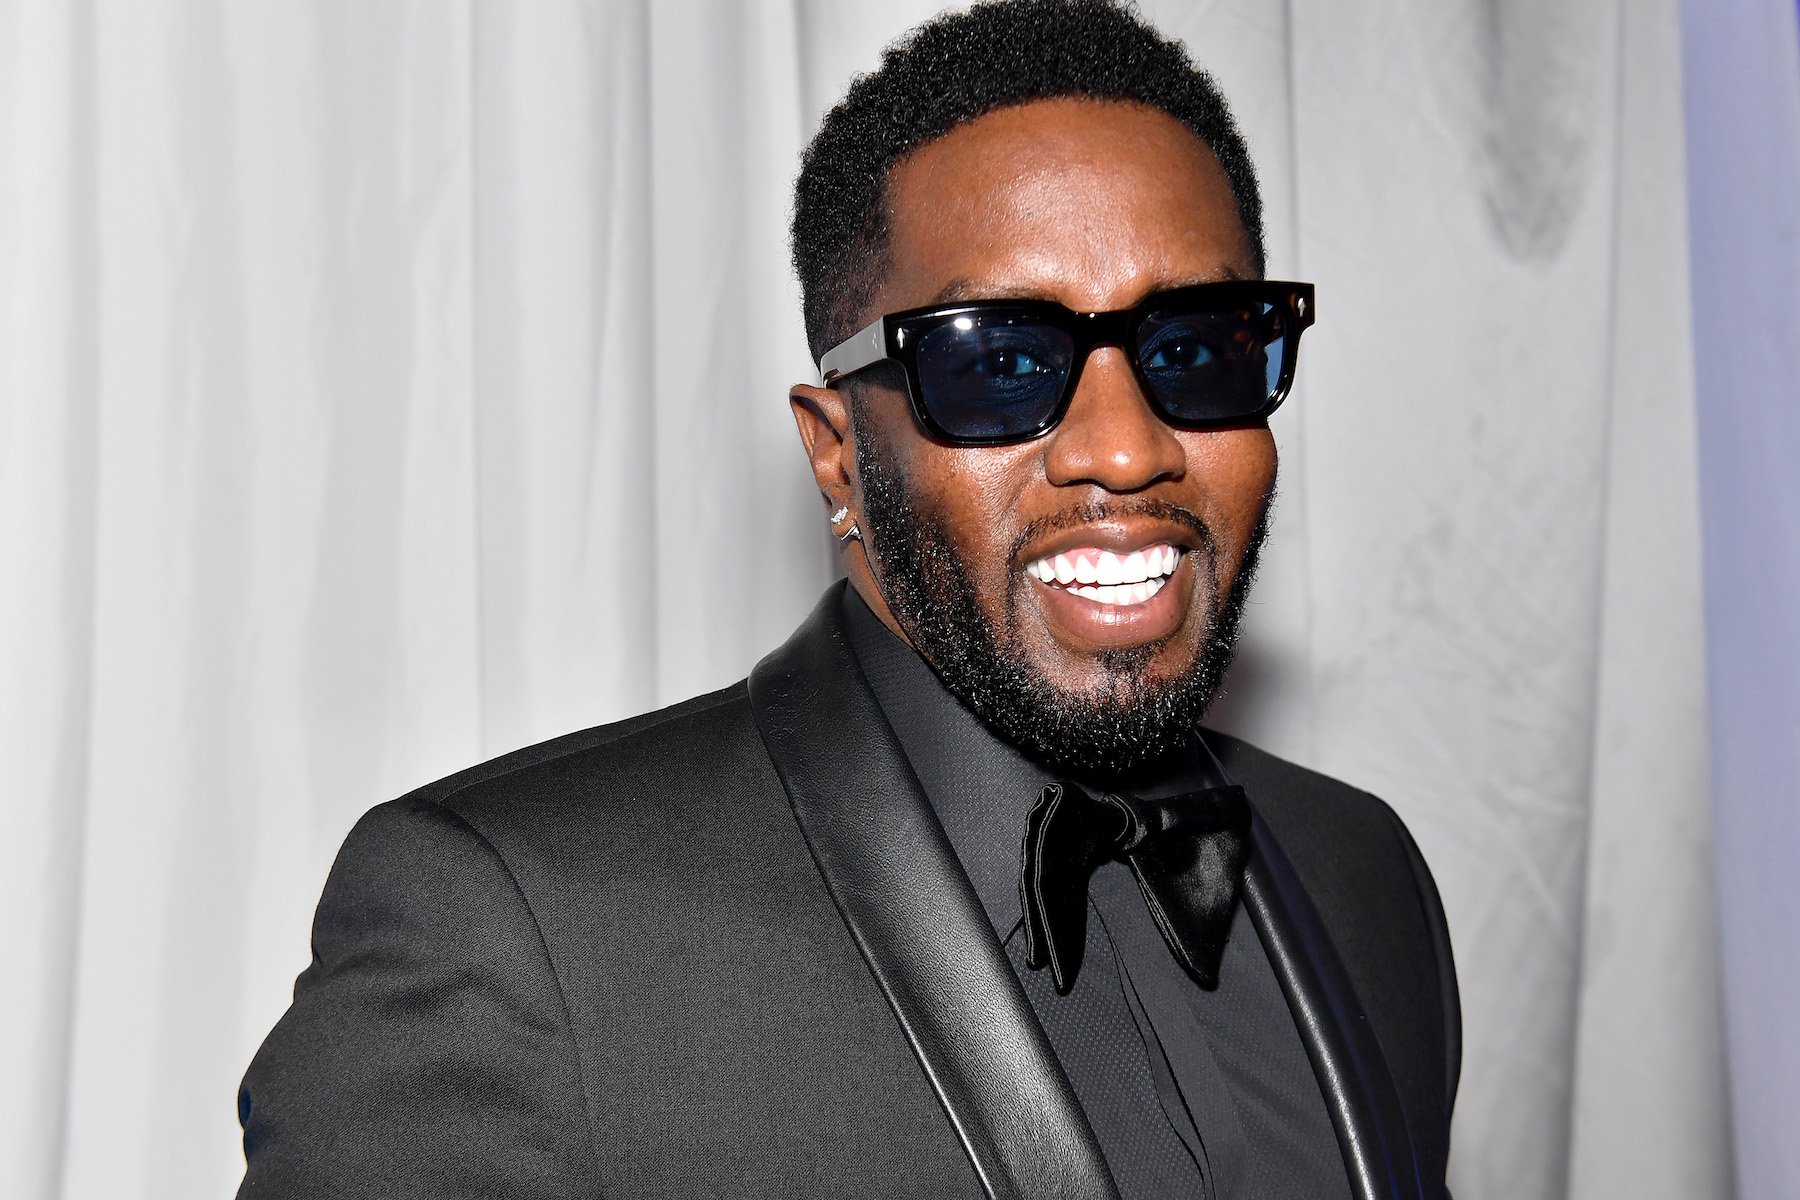 Sean "Diddy" Combs, who welcomed a daughter with the once-unknown mother of his child in December 2022, smiling for a photo